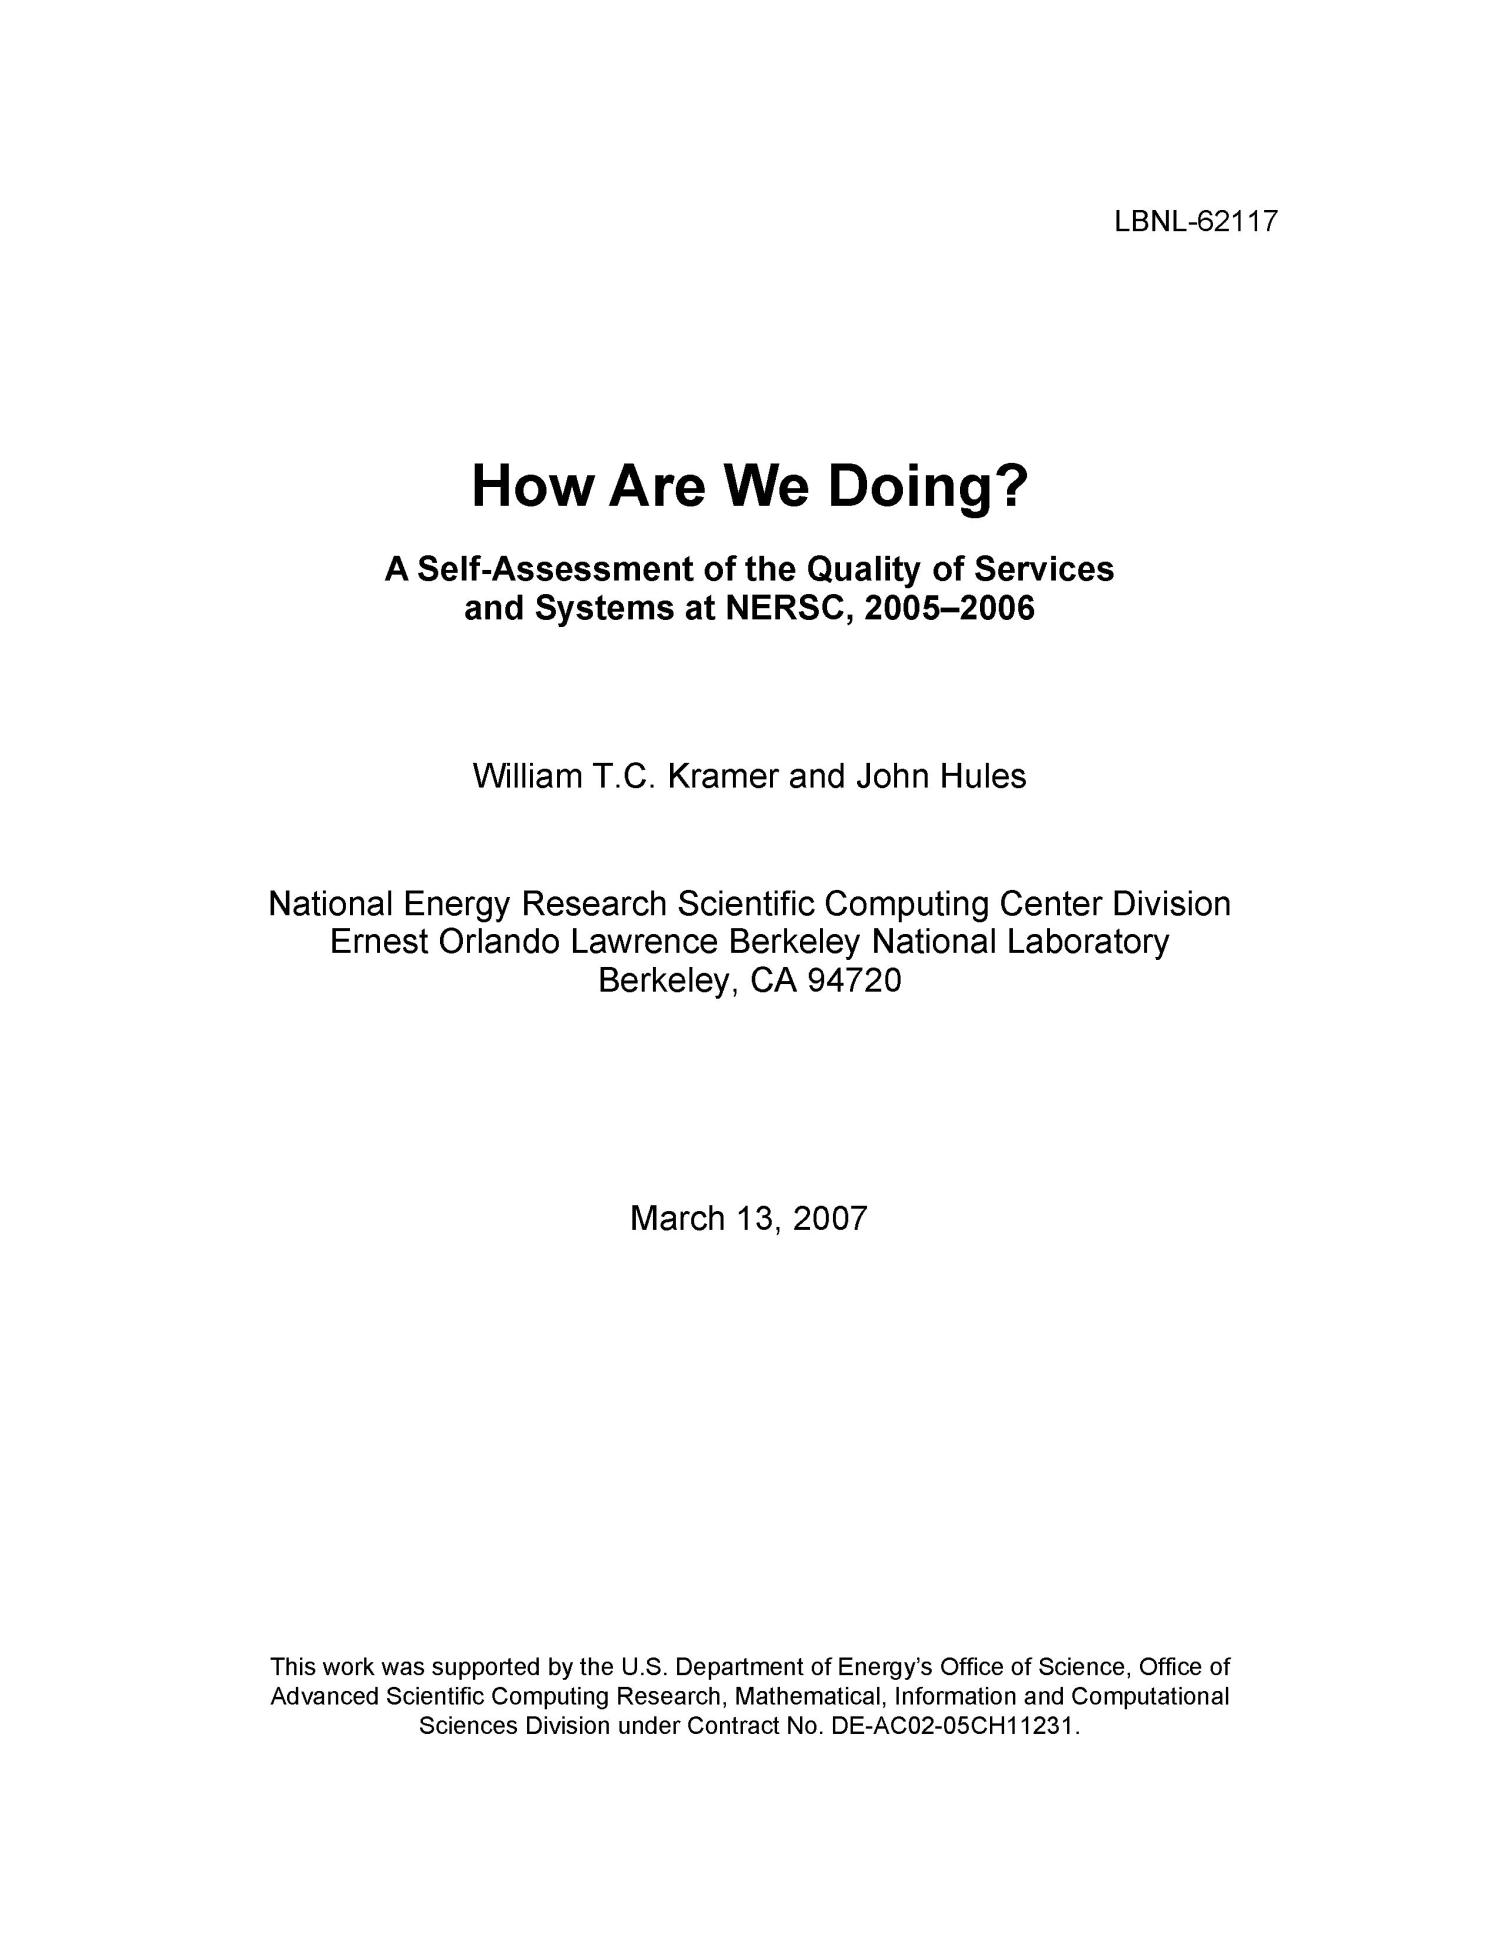 How Are We Doing? A Self-Assessment of the Quality of Services andSystems at NERSC, 2005-2006
                                                
                                                    [Sequence #]: 1 of 59
                                                